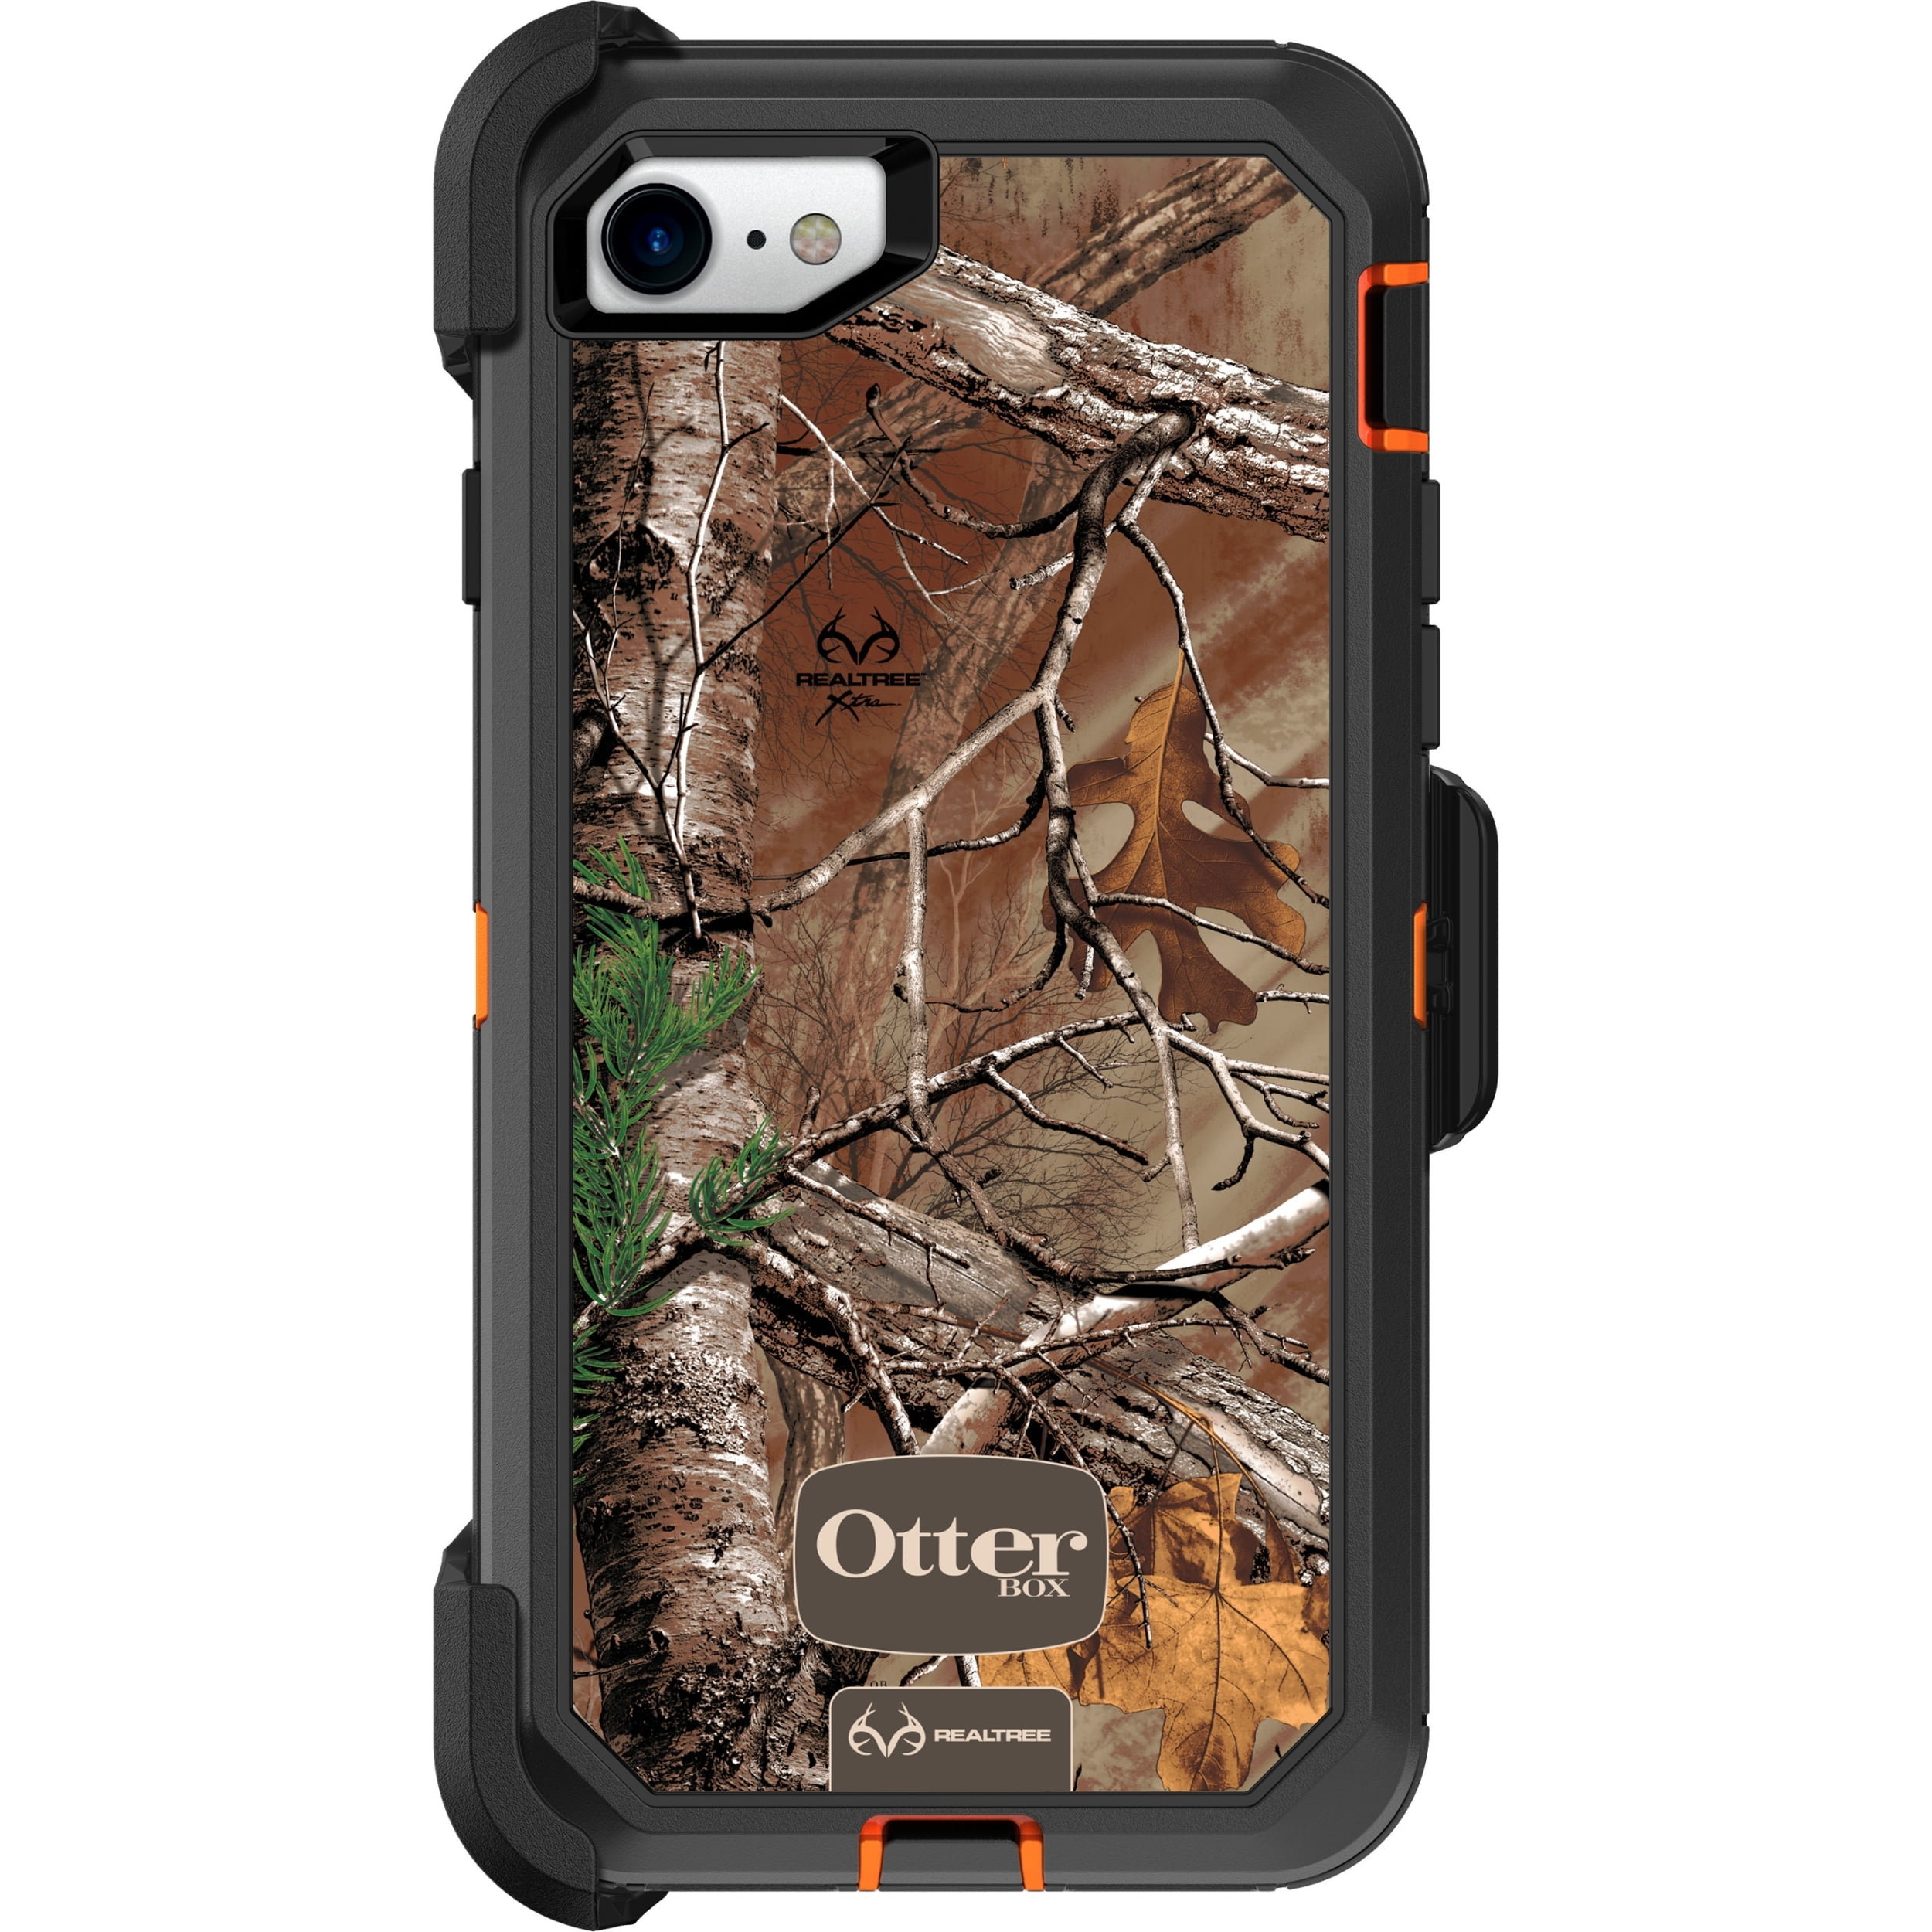 OtterBox Defender Series Realtree  Protective case for cell phone